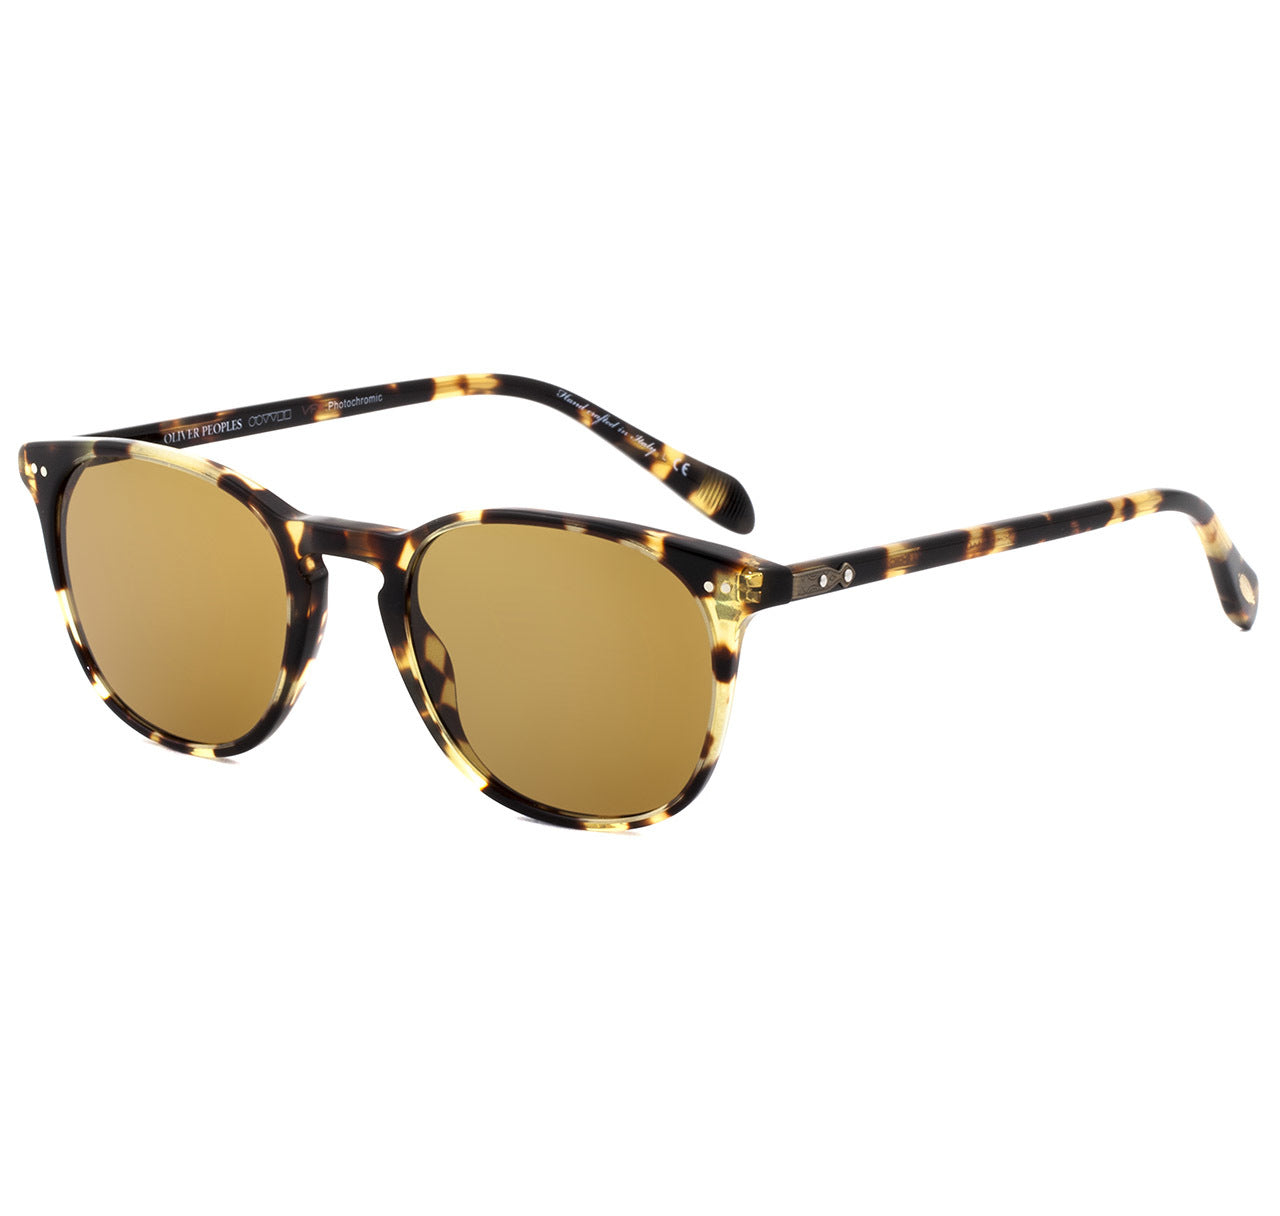 Oliver Peoples Sir Finley Vintage Dark Tortoise Brown with Champagne Photochromic Glass